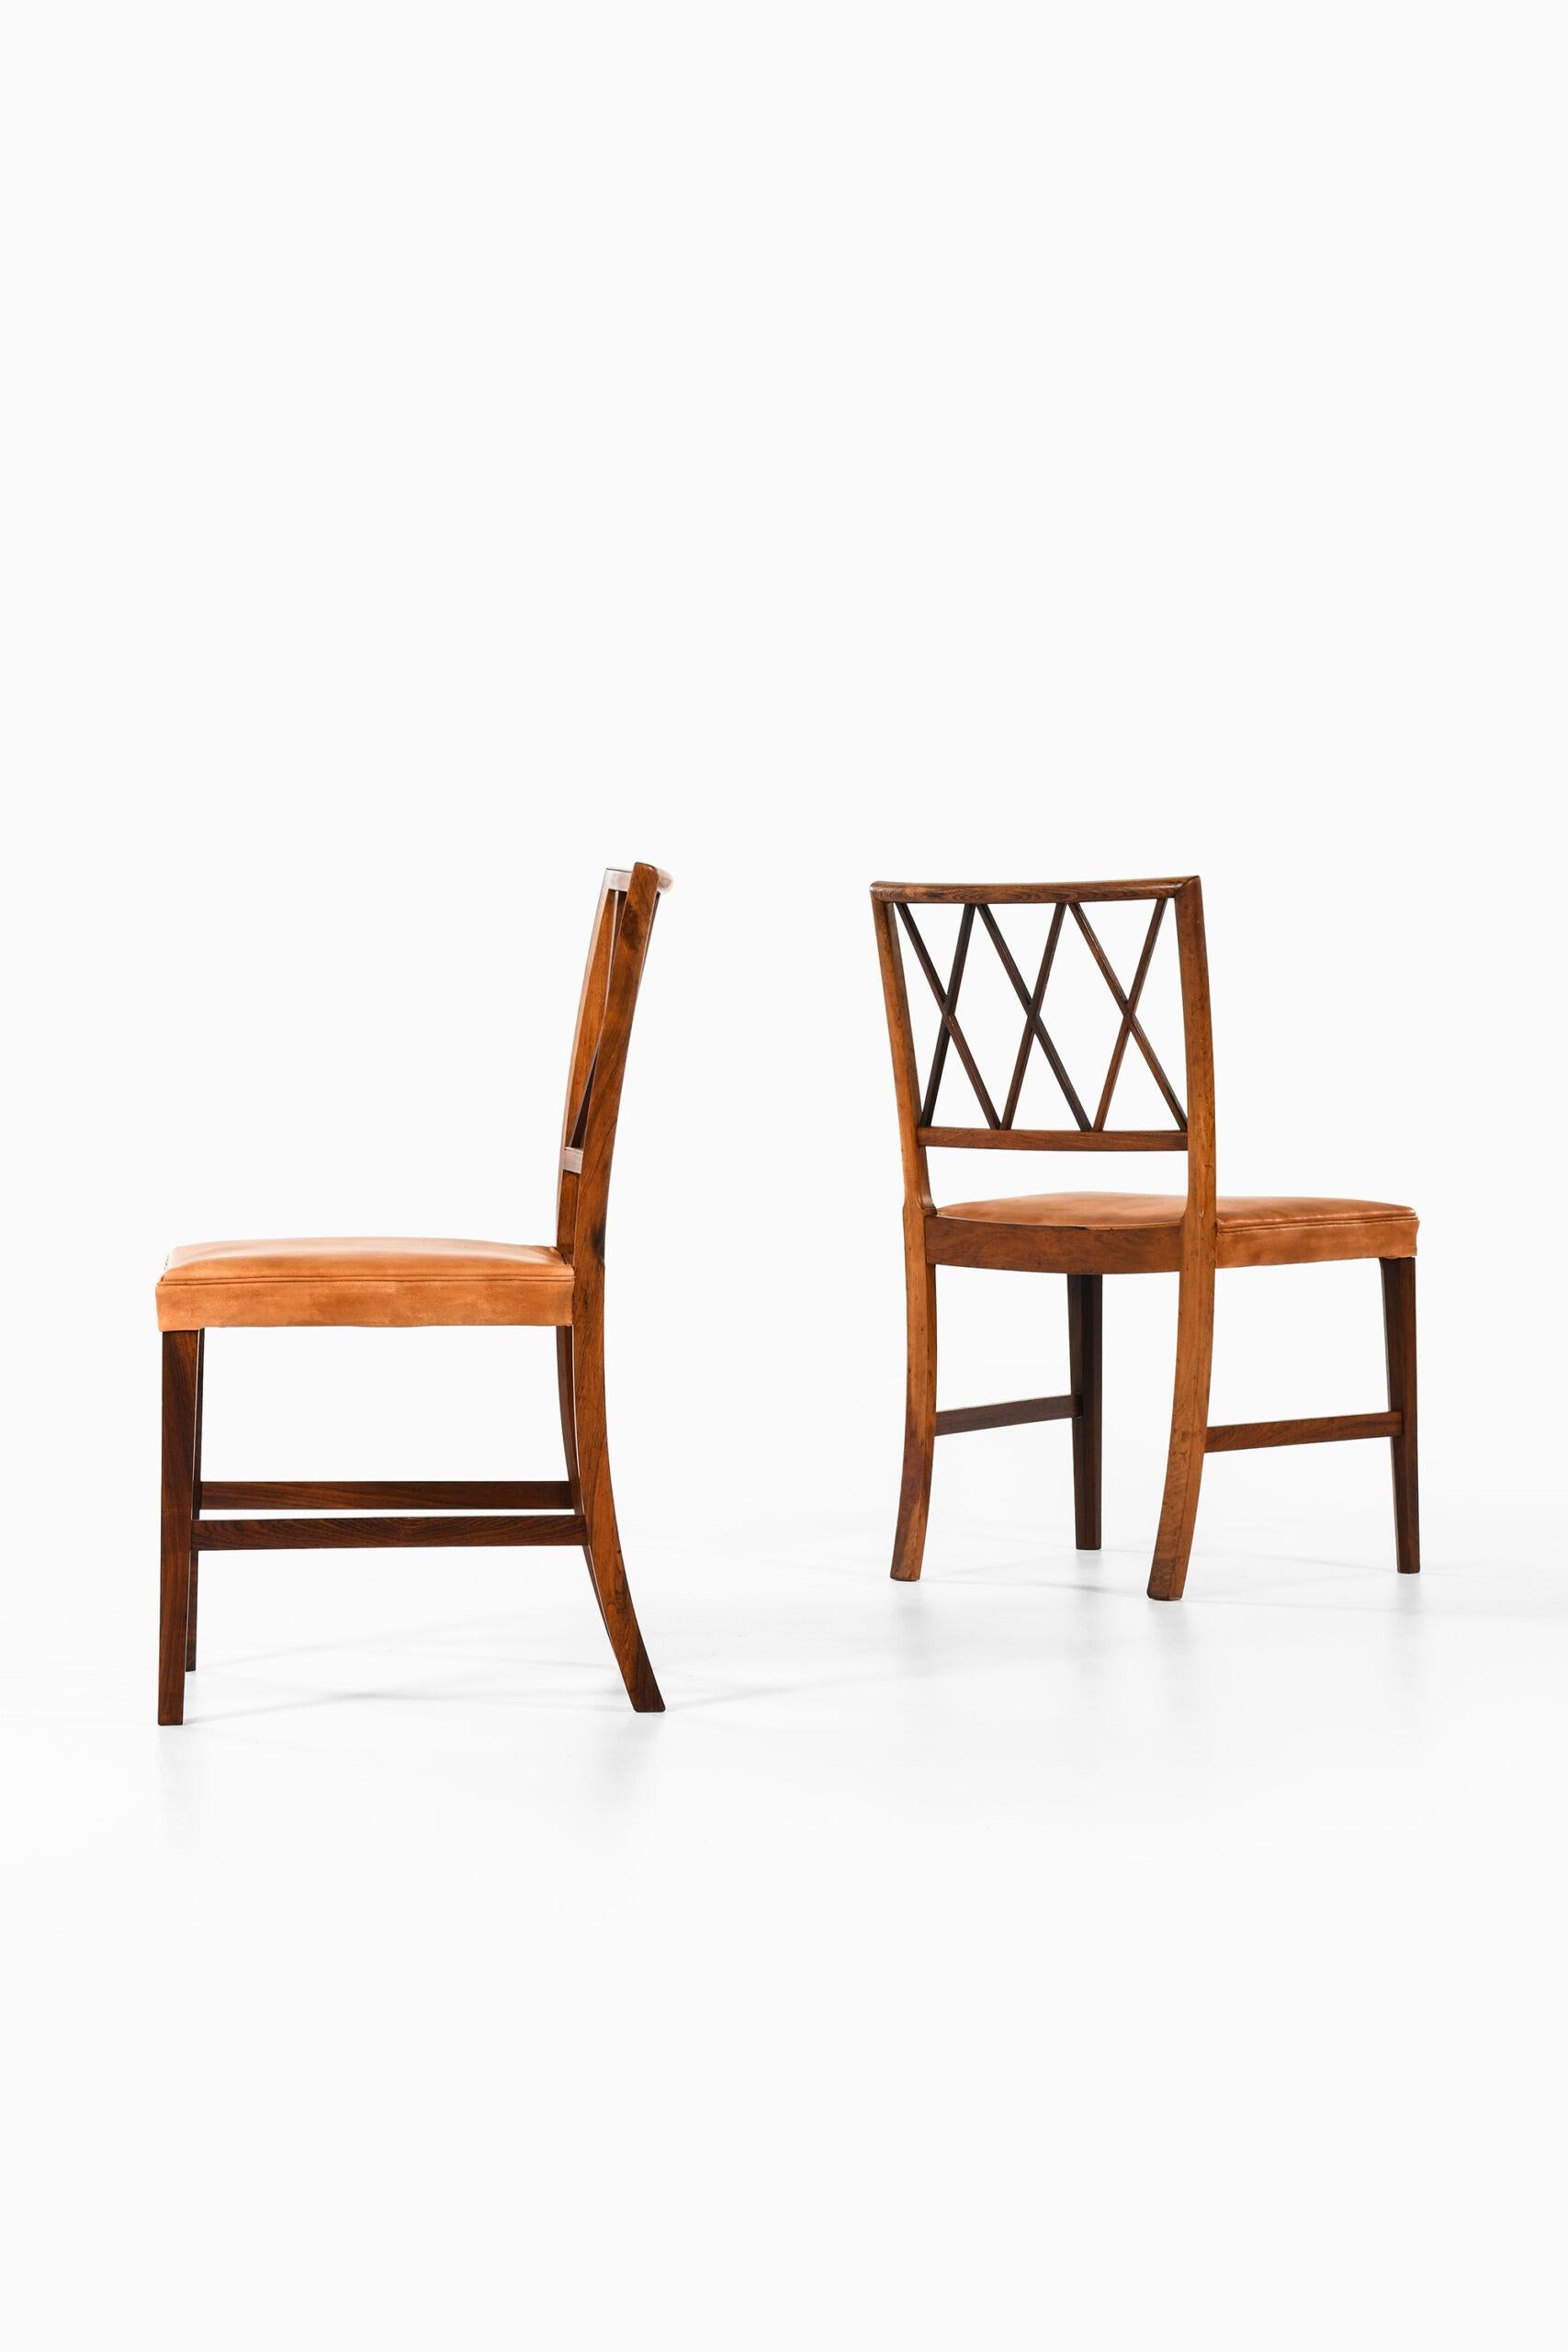 Danish Ole Wanscher Dining Chairs Produced by Cabinetmaker A.J. Iversen